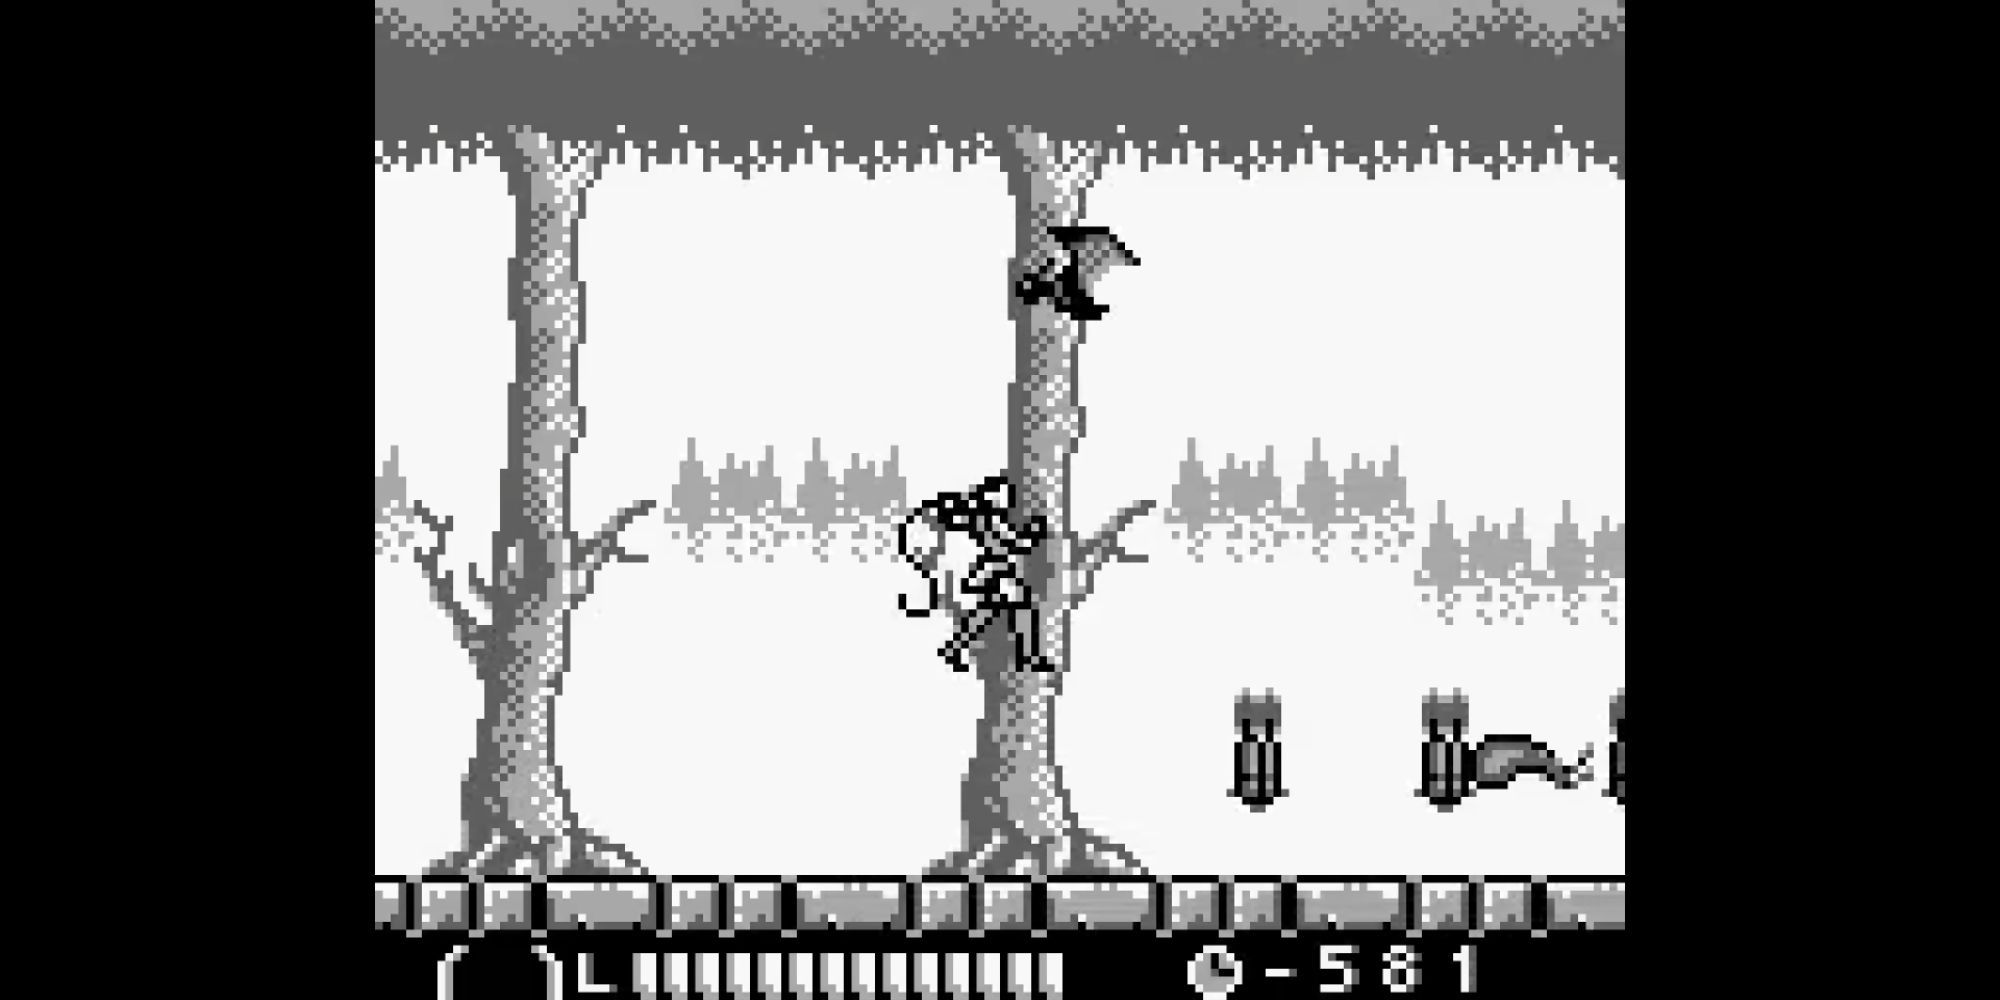 Sonia Belmont jumps in the air to attack an enemy